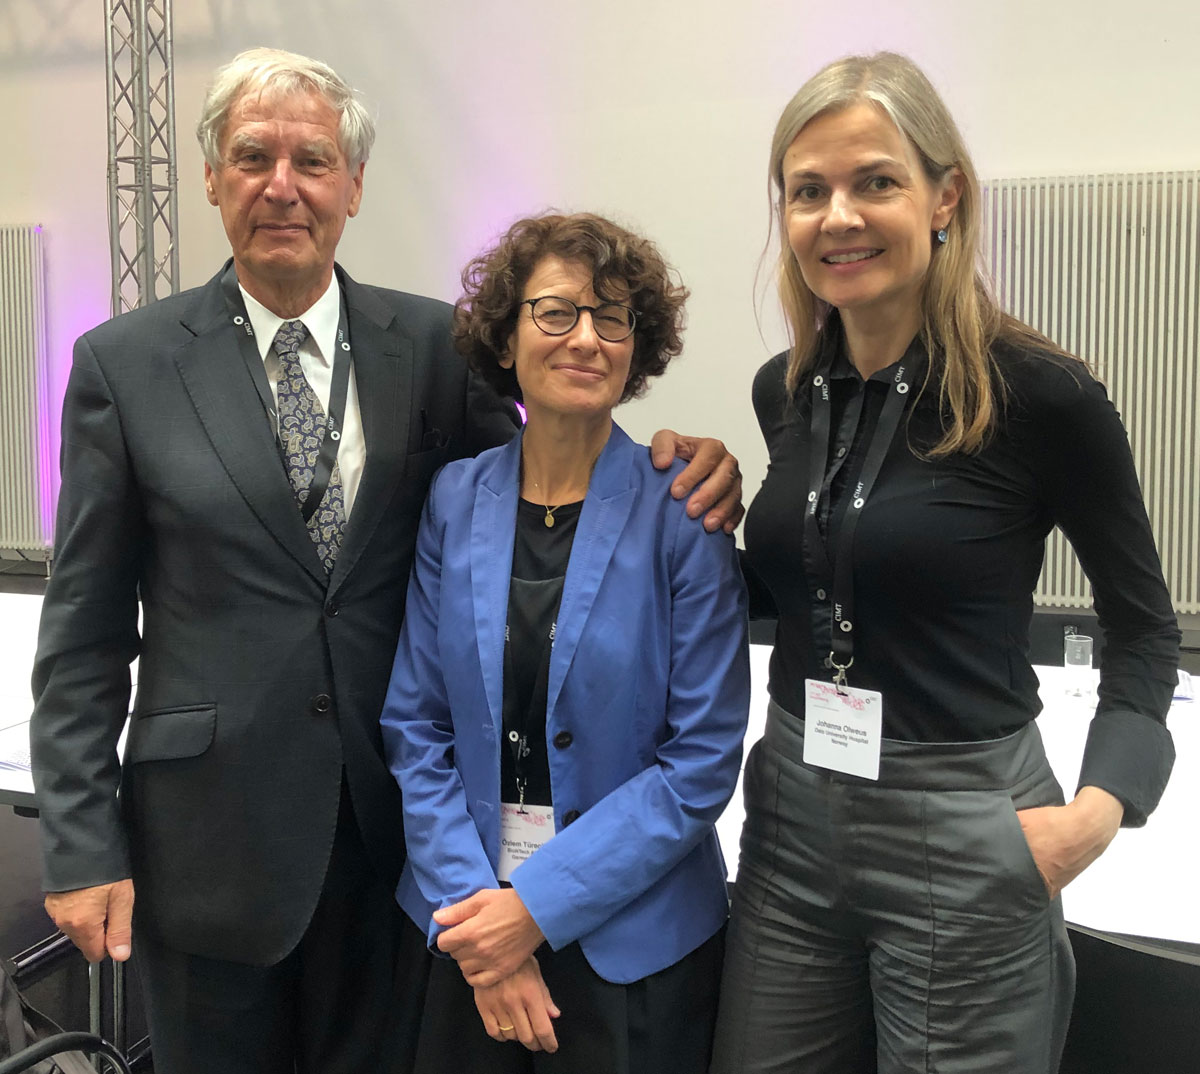 The past president, Christoph Huber, and the new president, Özlem Tureci, together with newly elected member of the Executive Board, Johanna Olweus